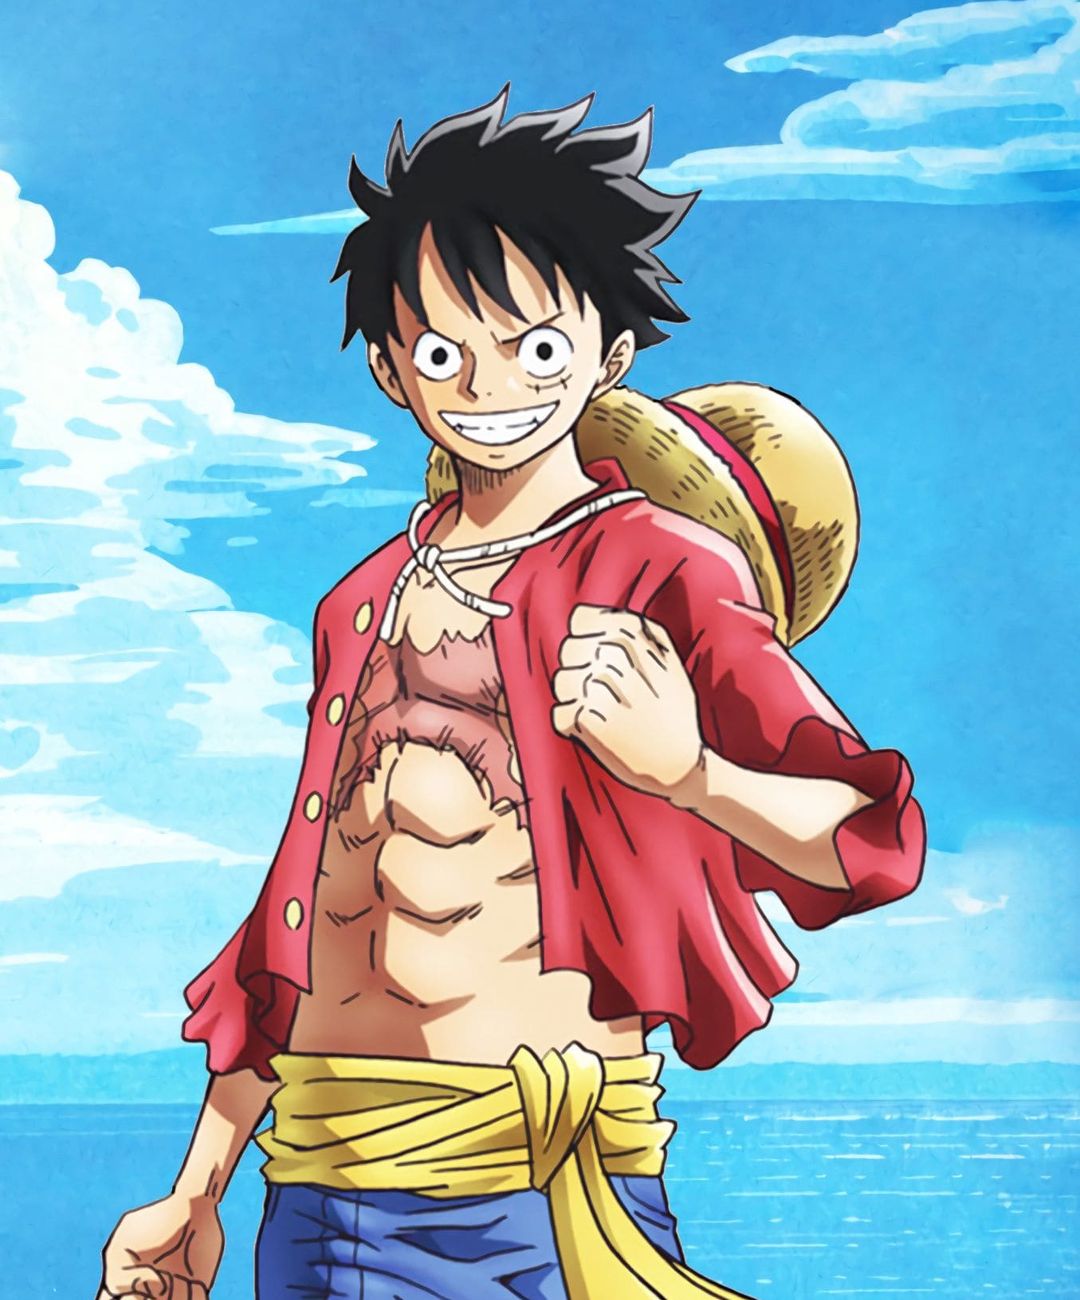 Monkey D Luffy Profile Picture Profile Pics, Image and Dp Download